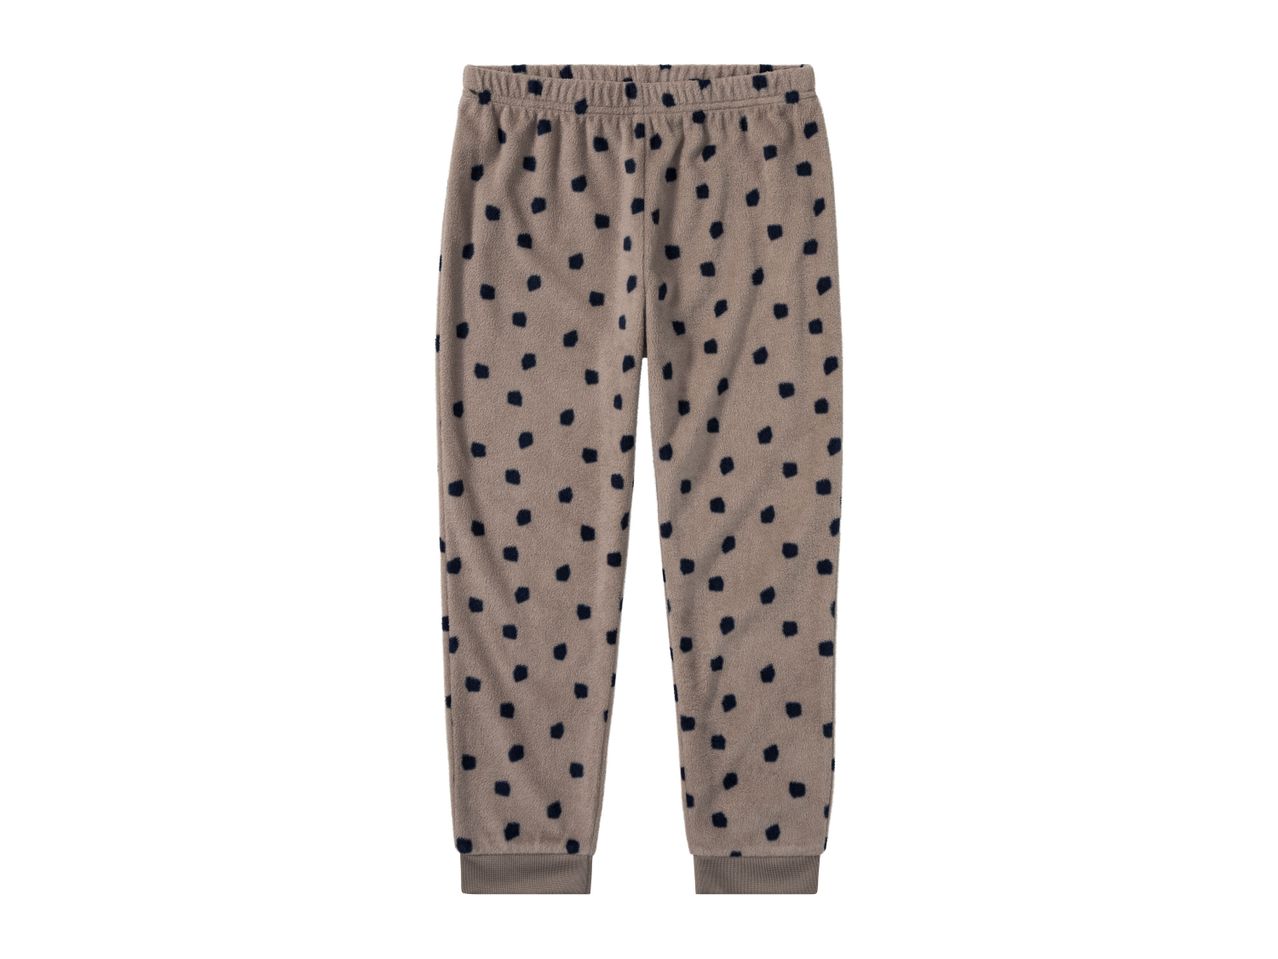 Go to full screen view: Lupilu Younger Kids' Pyjamas - Image 2